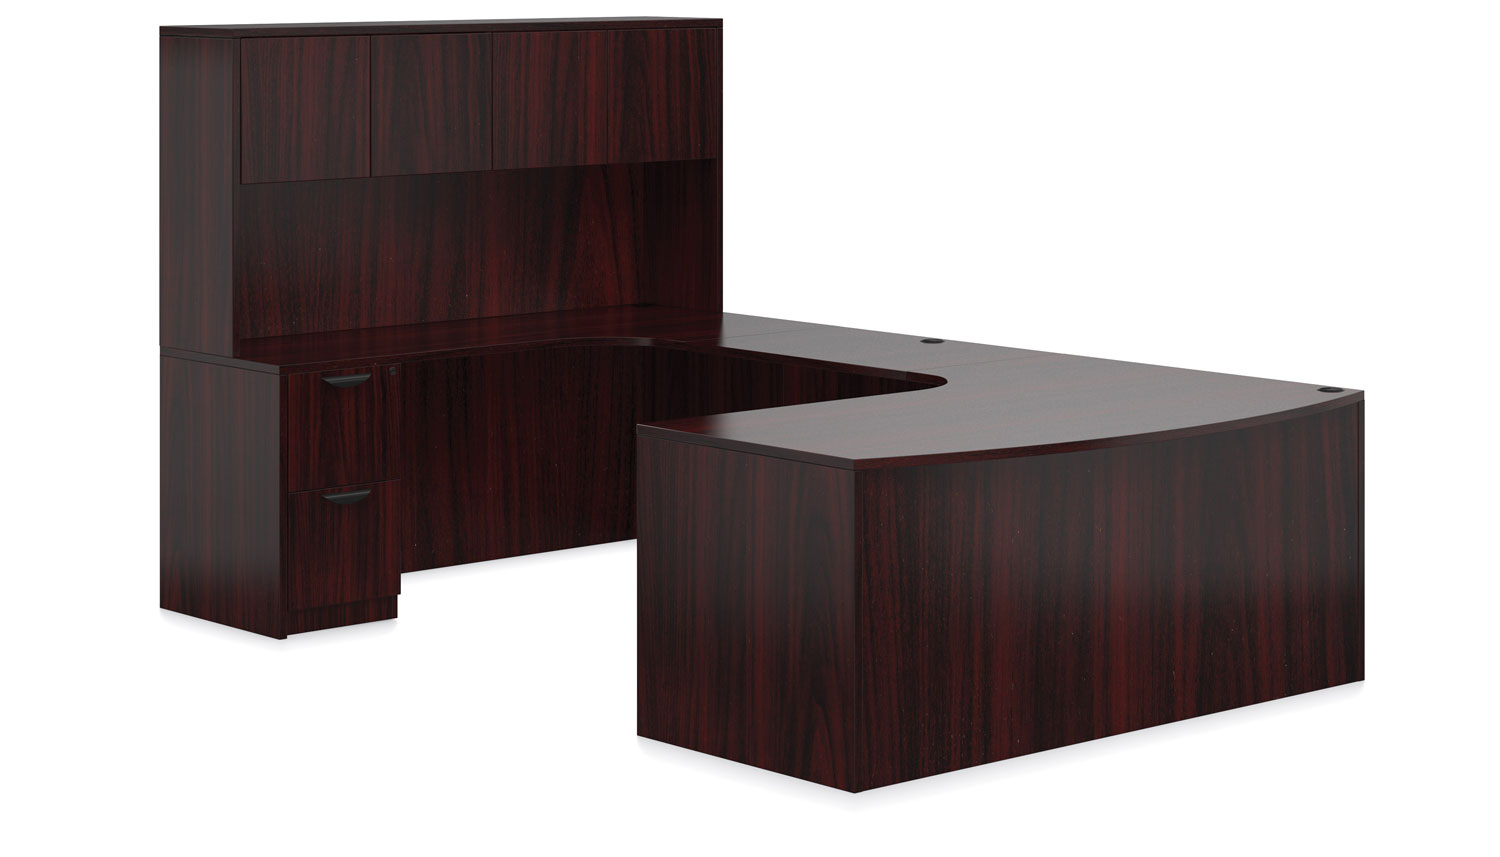 Affordable Office Furniture Desks from OTG - Shown in American Mahogany woodgrain